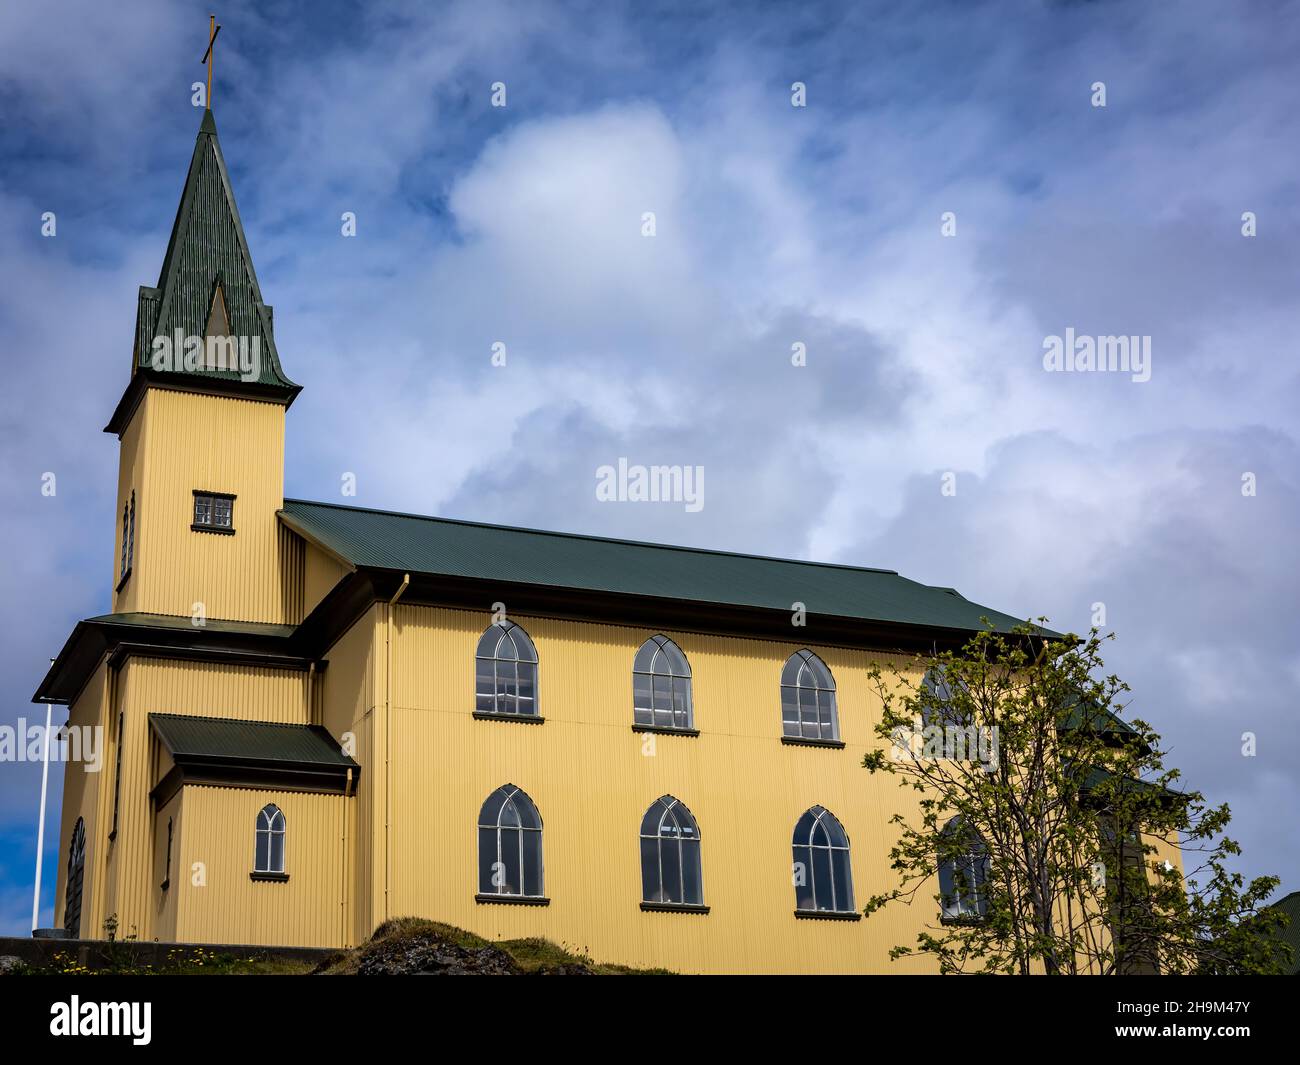 Hafnarfjordur, Iceland - July 17, 2021: A Frikirkjan church in the town center. Traditional icelandic architecture, yellow walls, green rooftop. Stock Photo